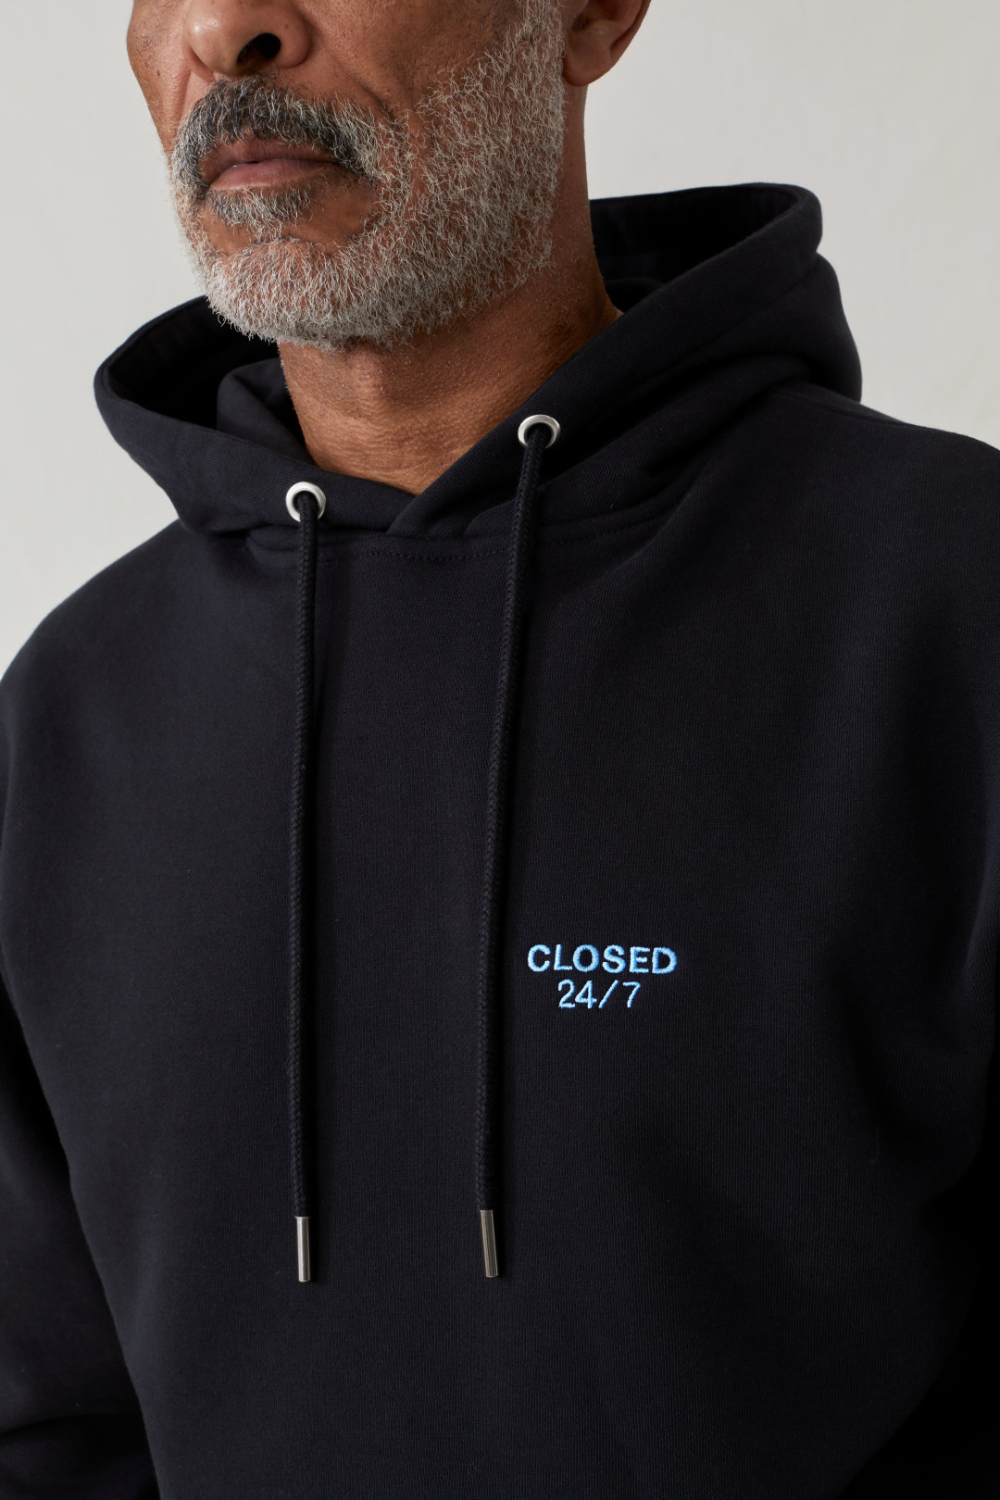 Hoodie Design The  Importance Of Picking A Great One